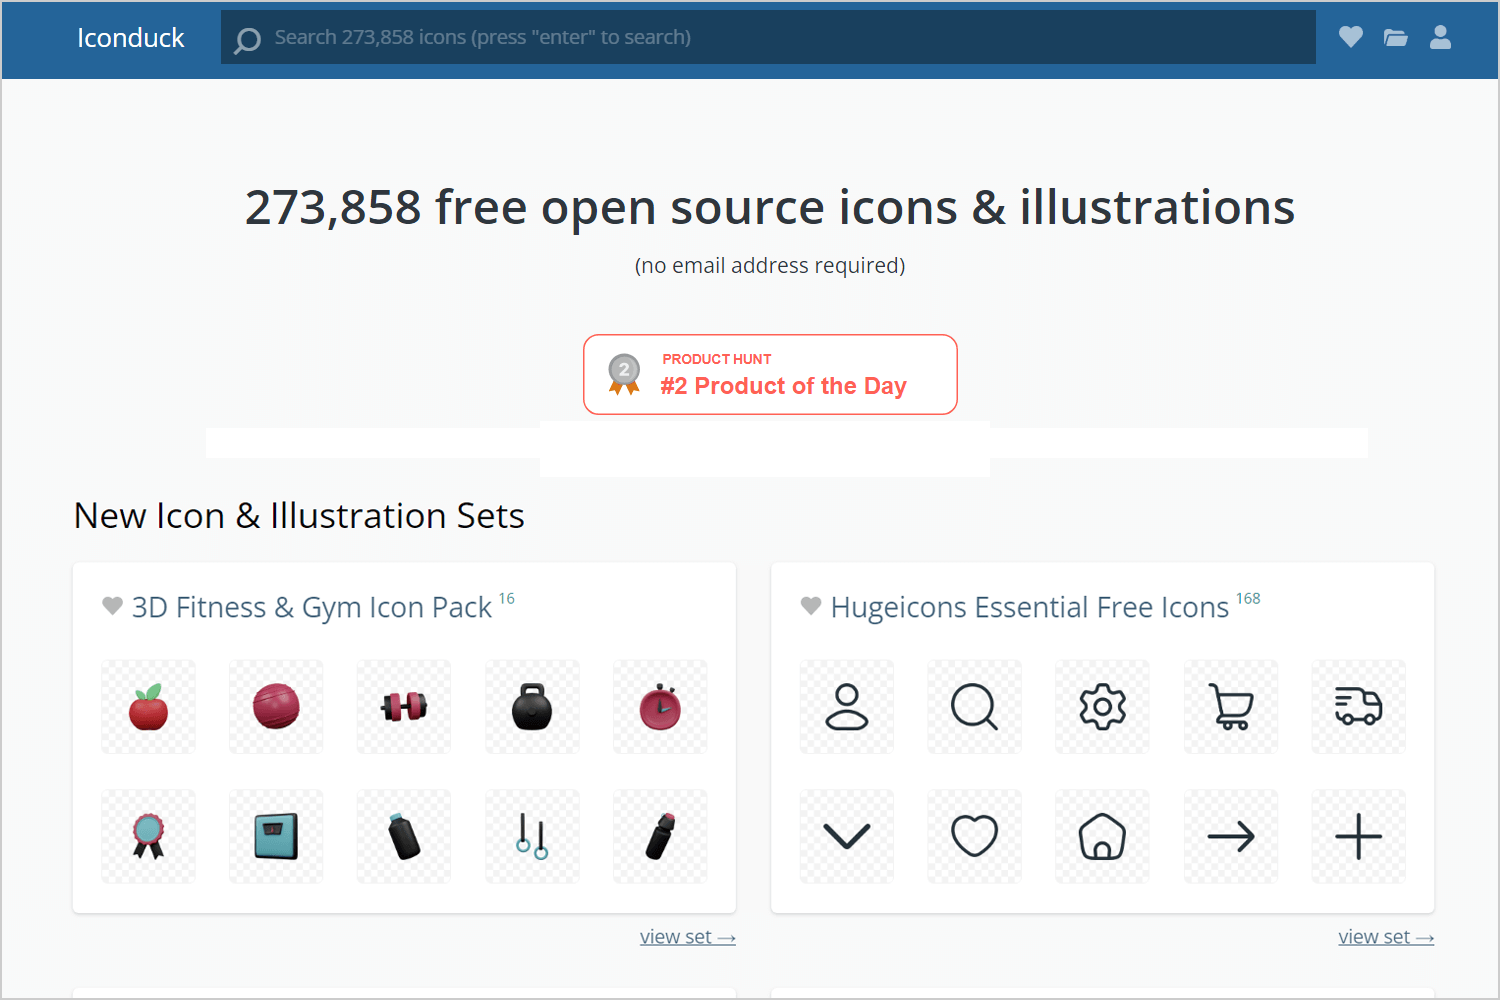 Iconduck interface with free icons and illustrations